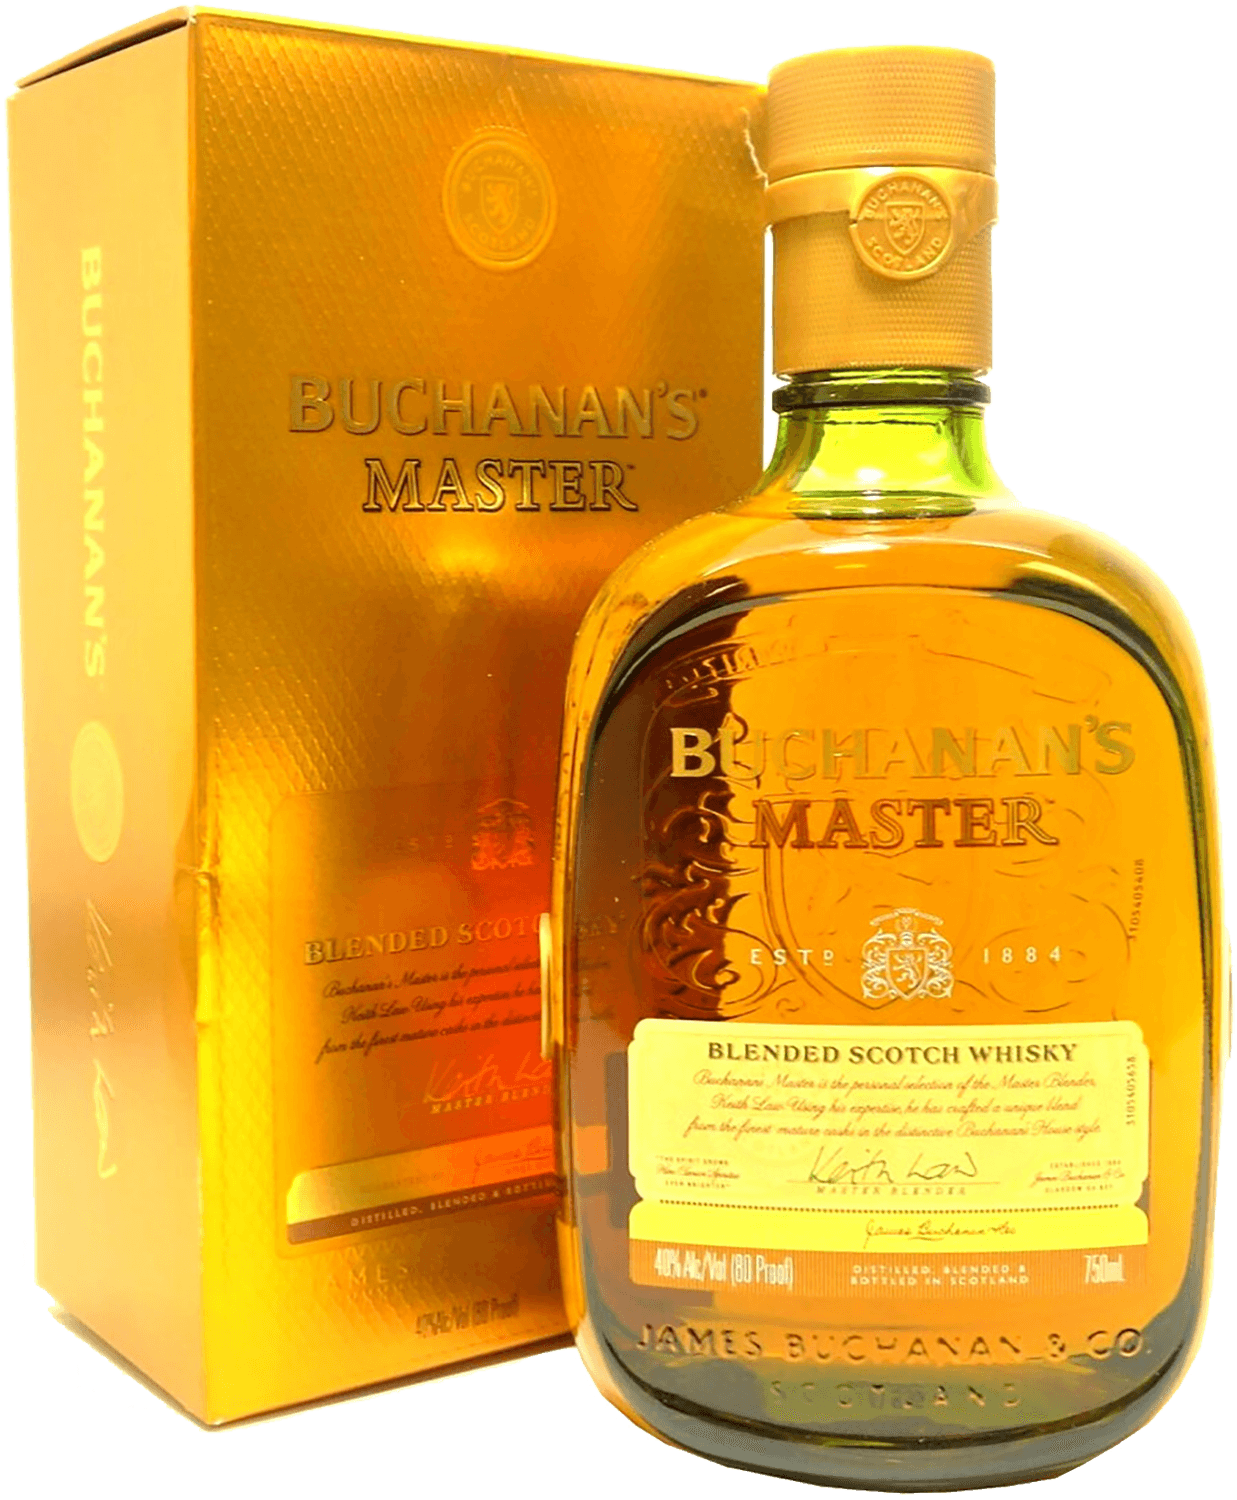 Buchanan's Master Blended Scotch Whisky (gift box) angus dundee cask strength blended grain scotch whisky 50 y o gift box